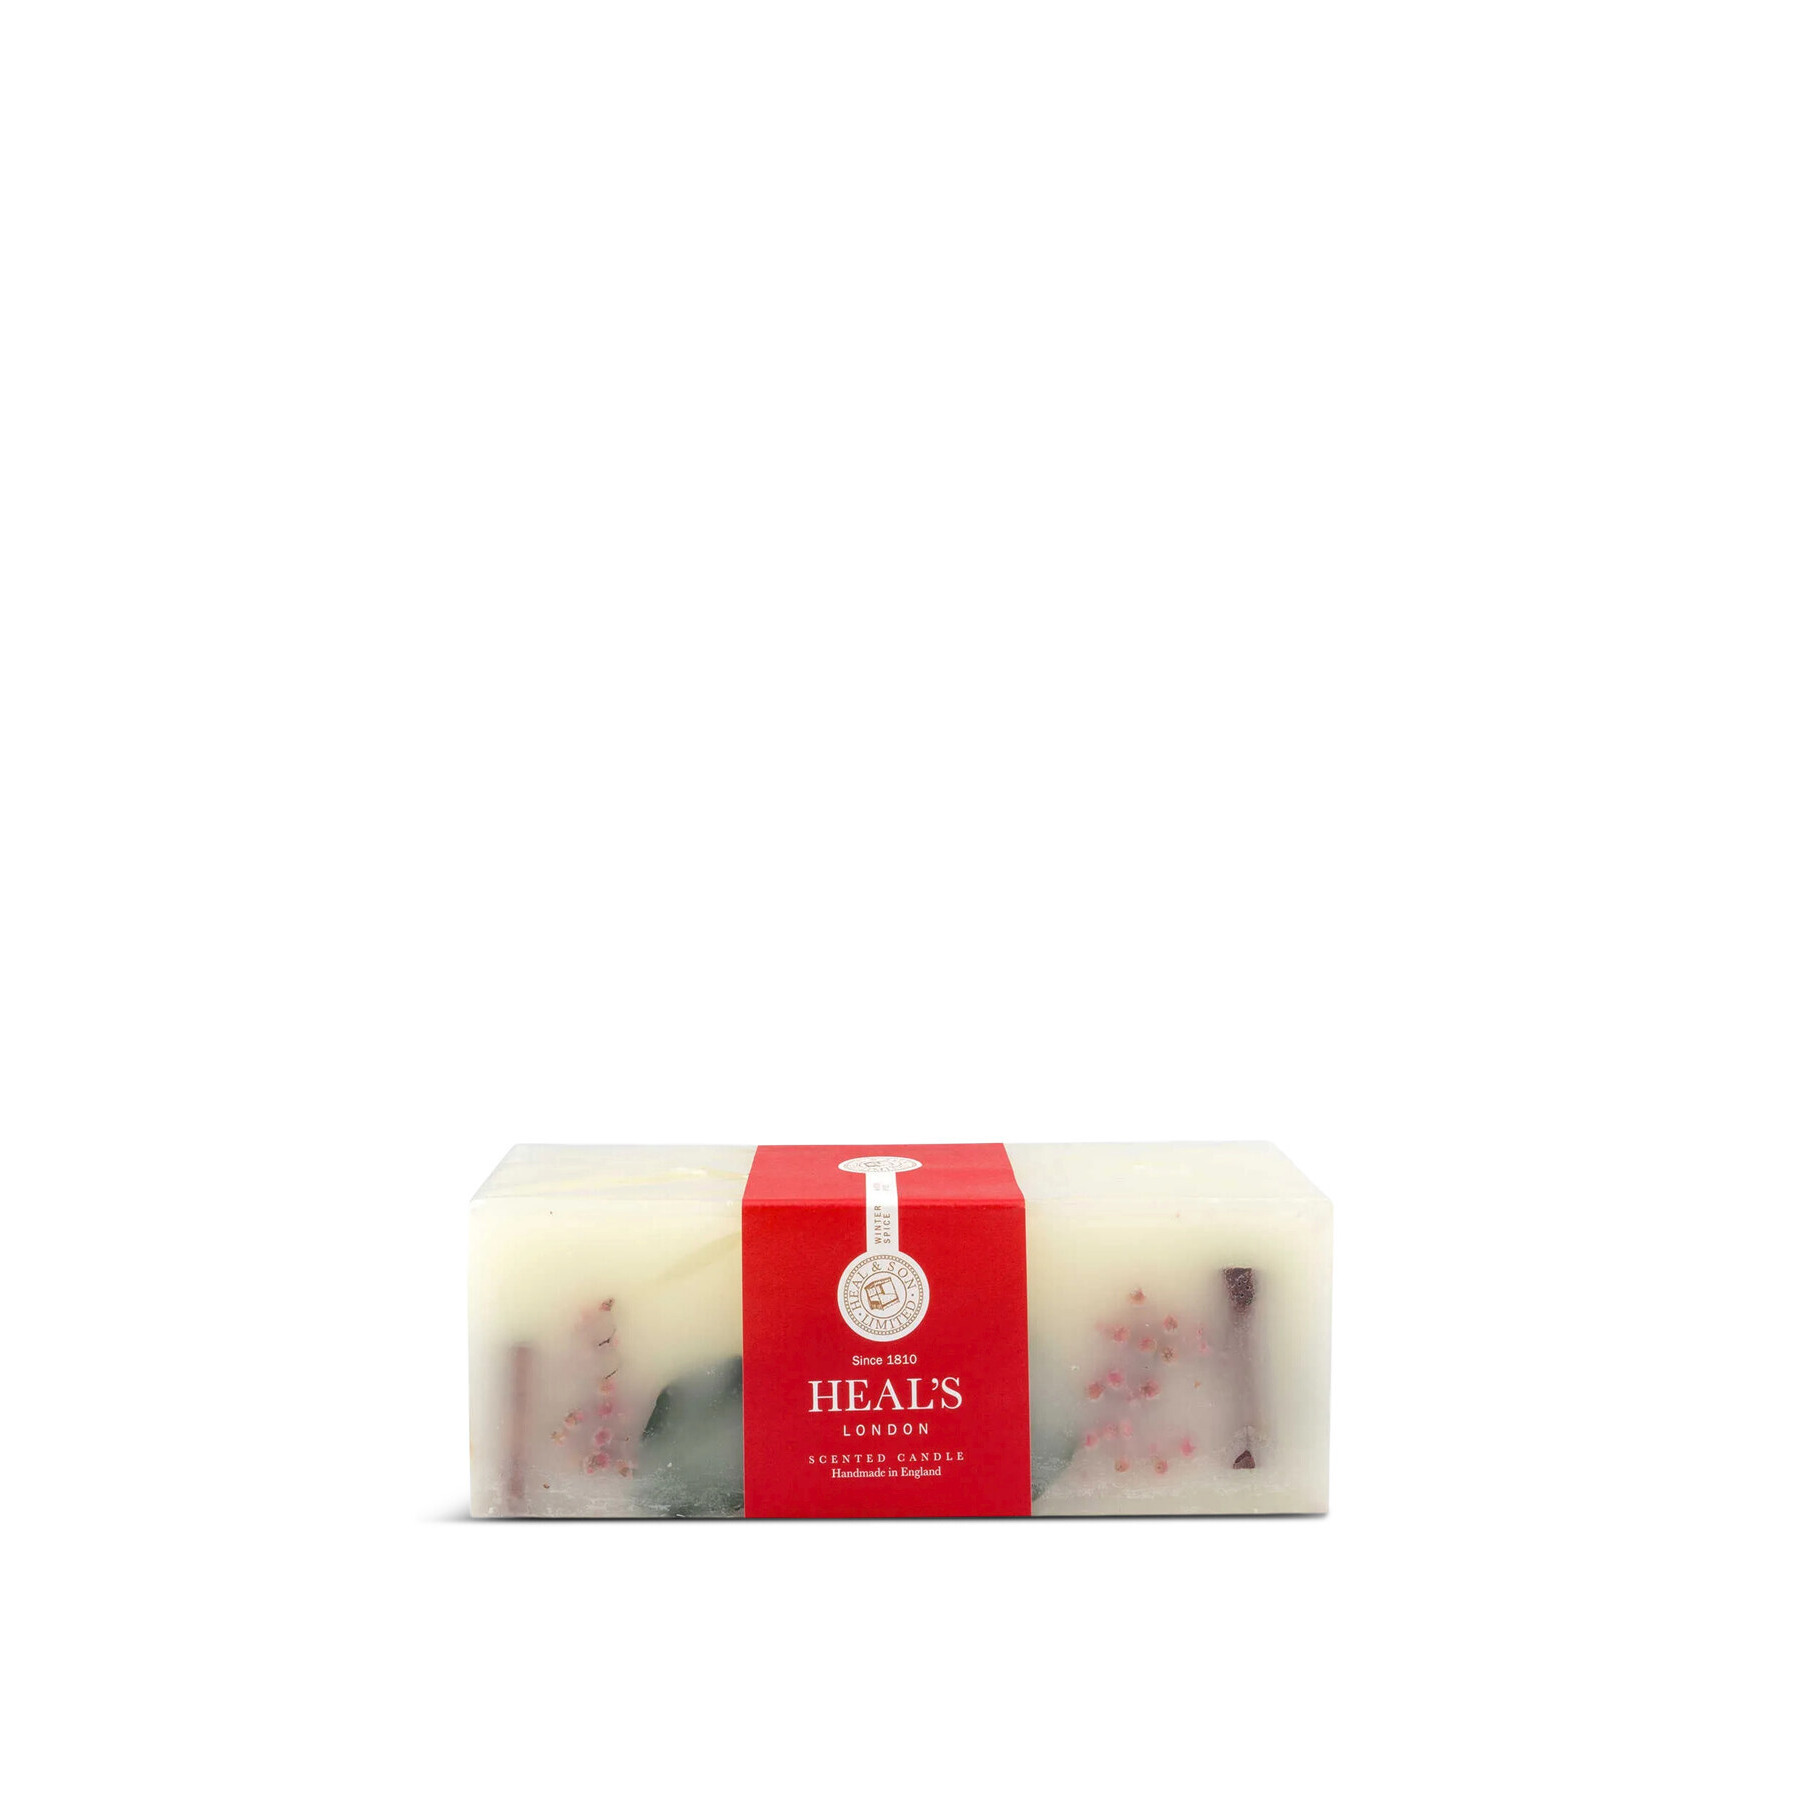 Heal's Winter Spice Brick Candle With Botanicals White - image 1